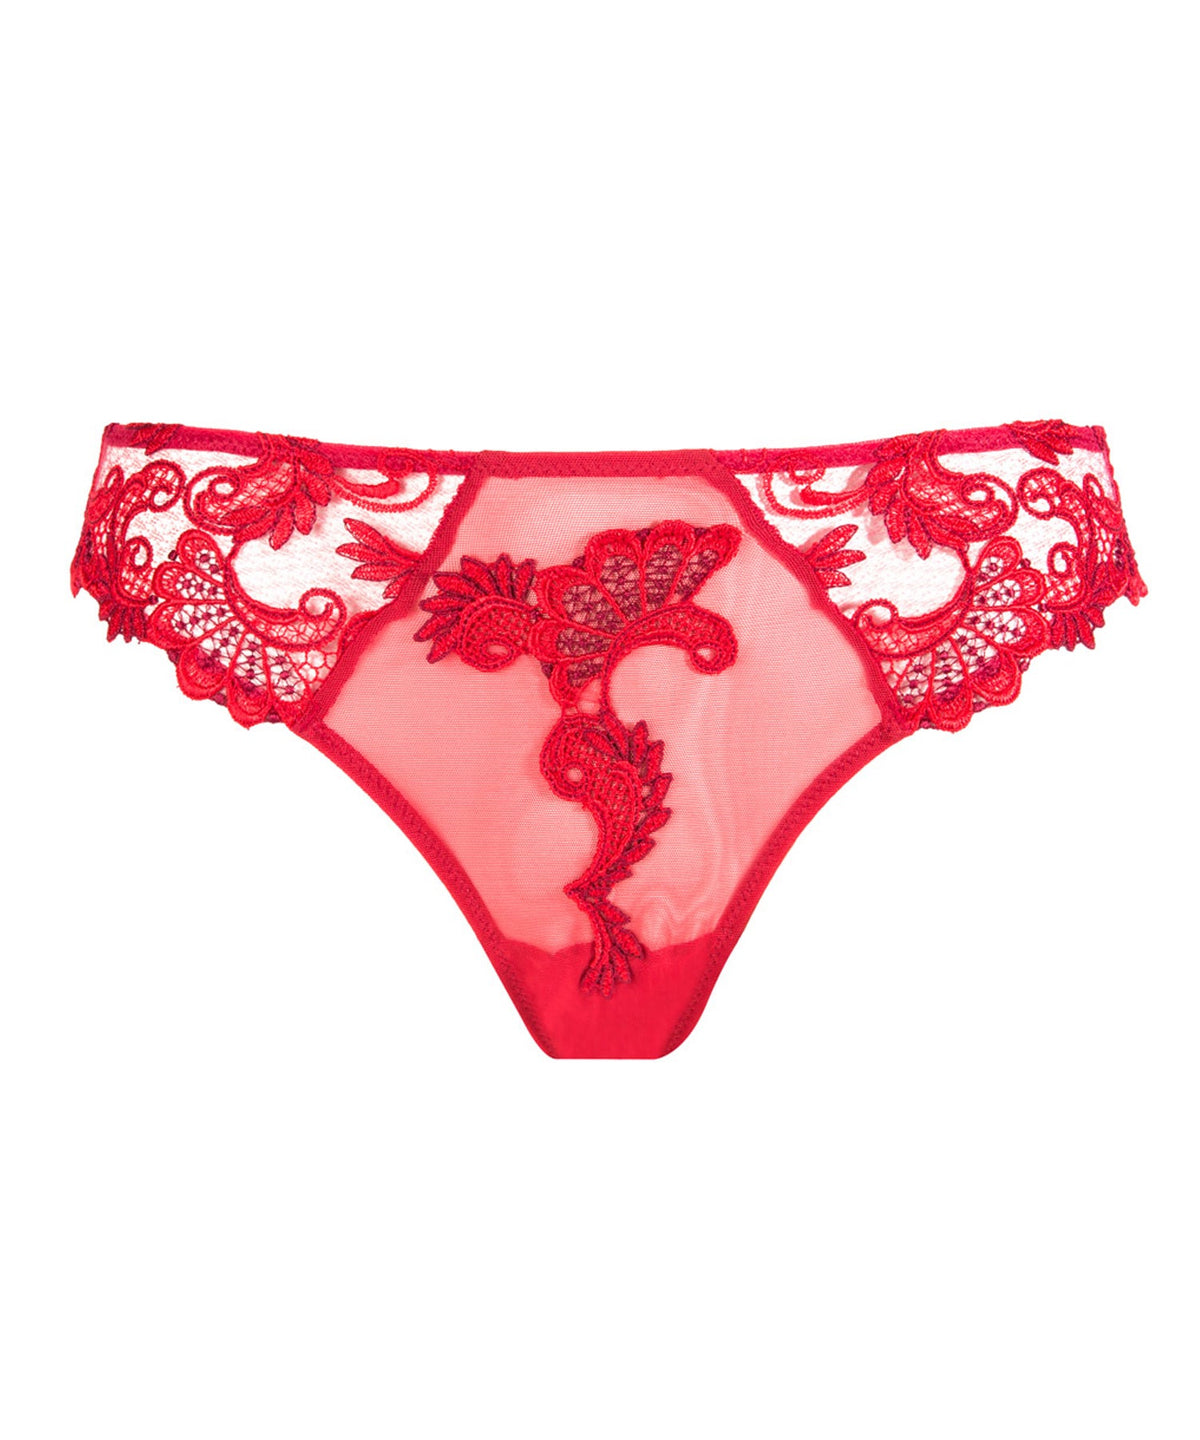 Dressing Floral Solaire Red Italian Brief